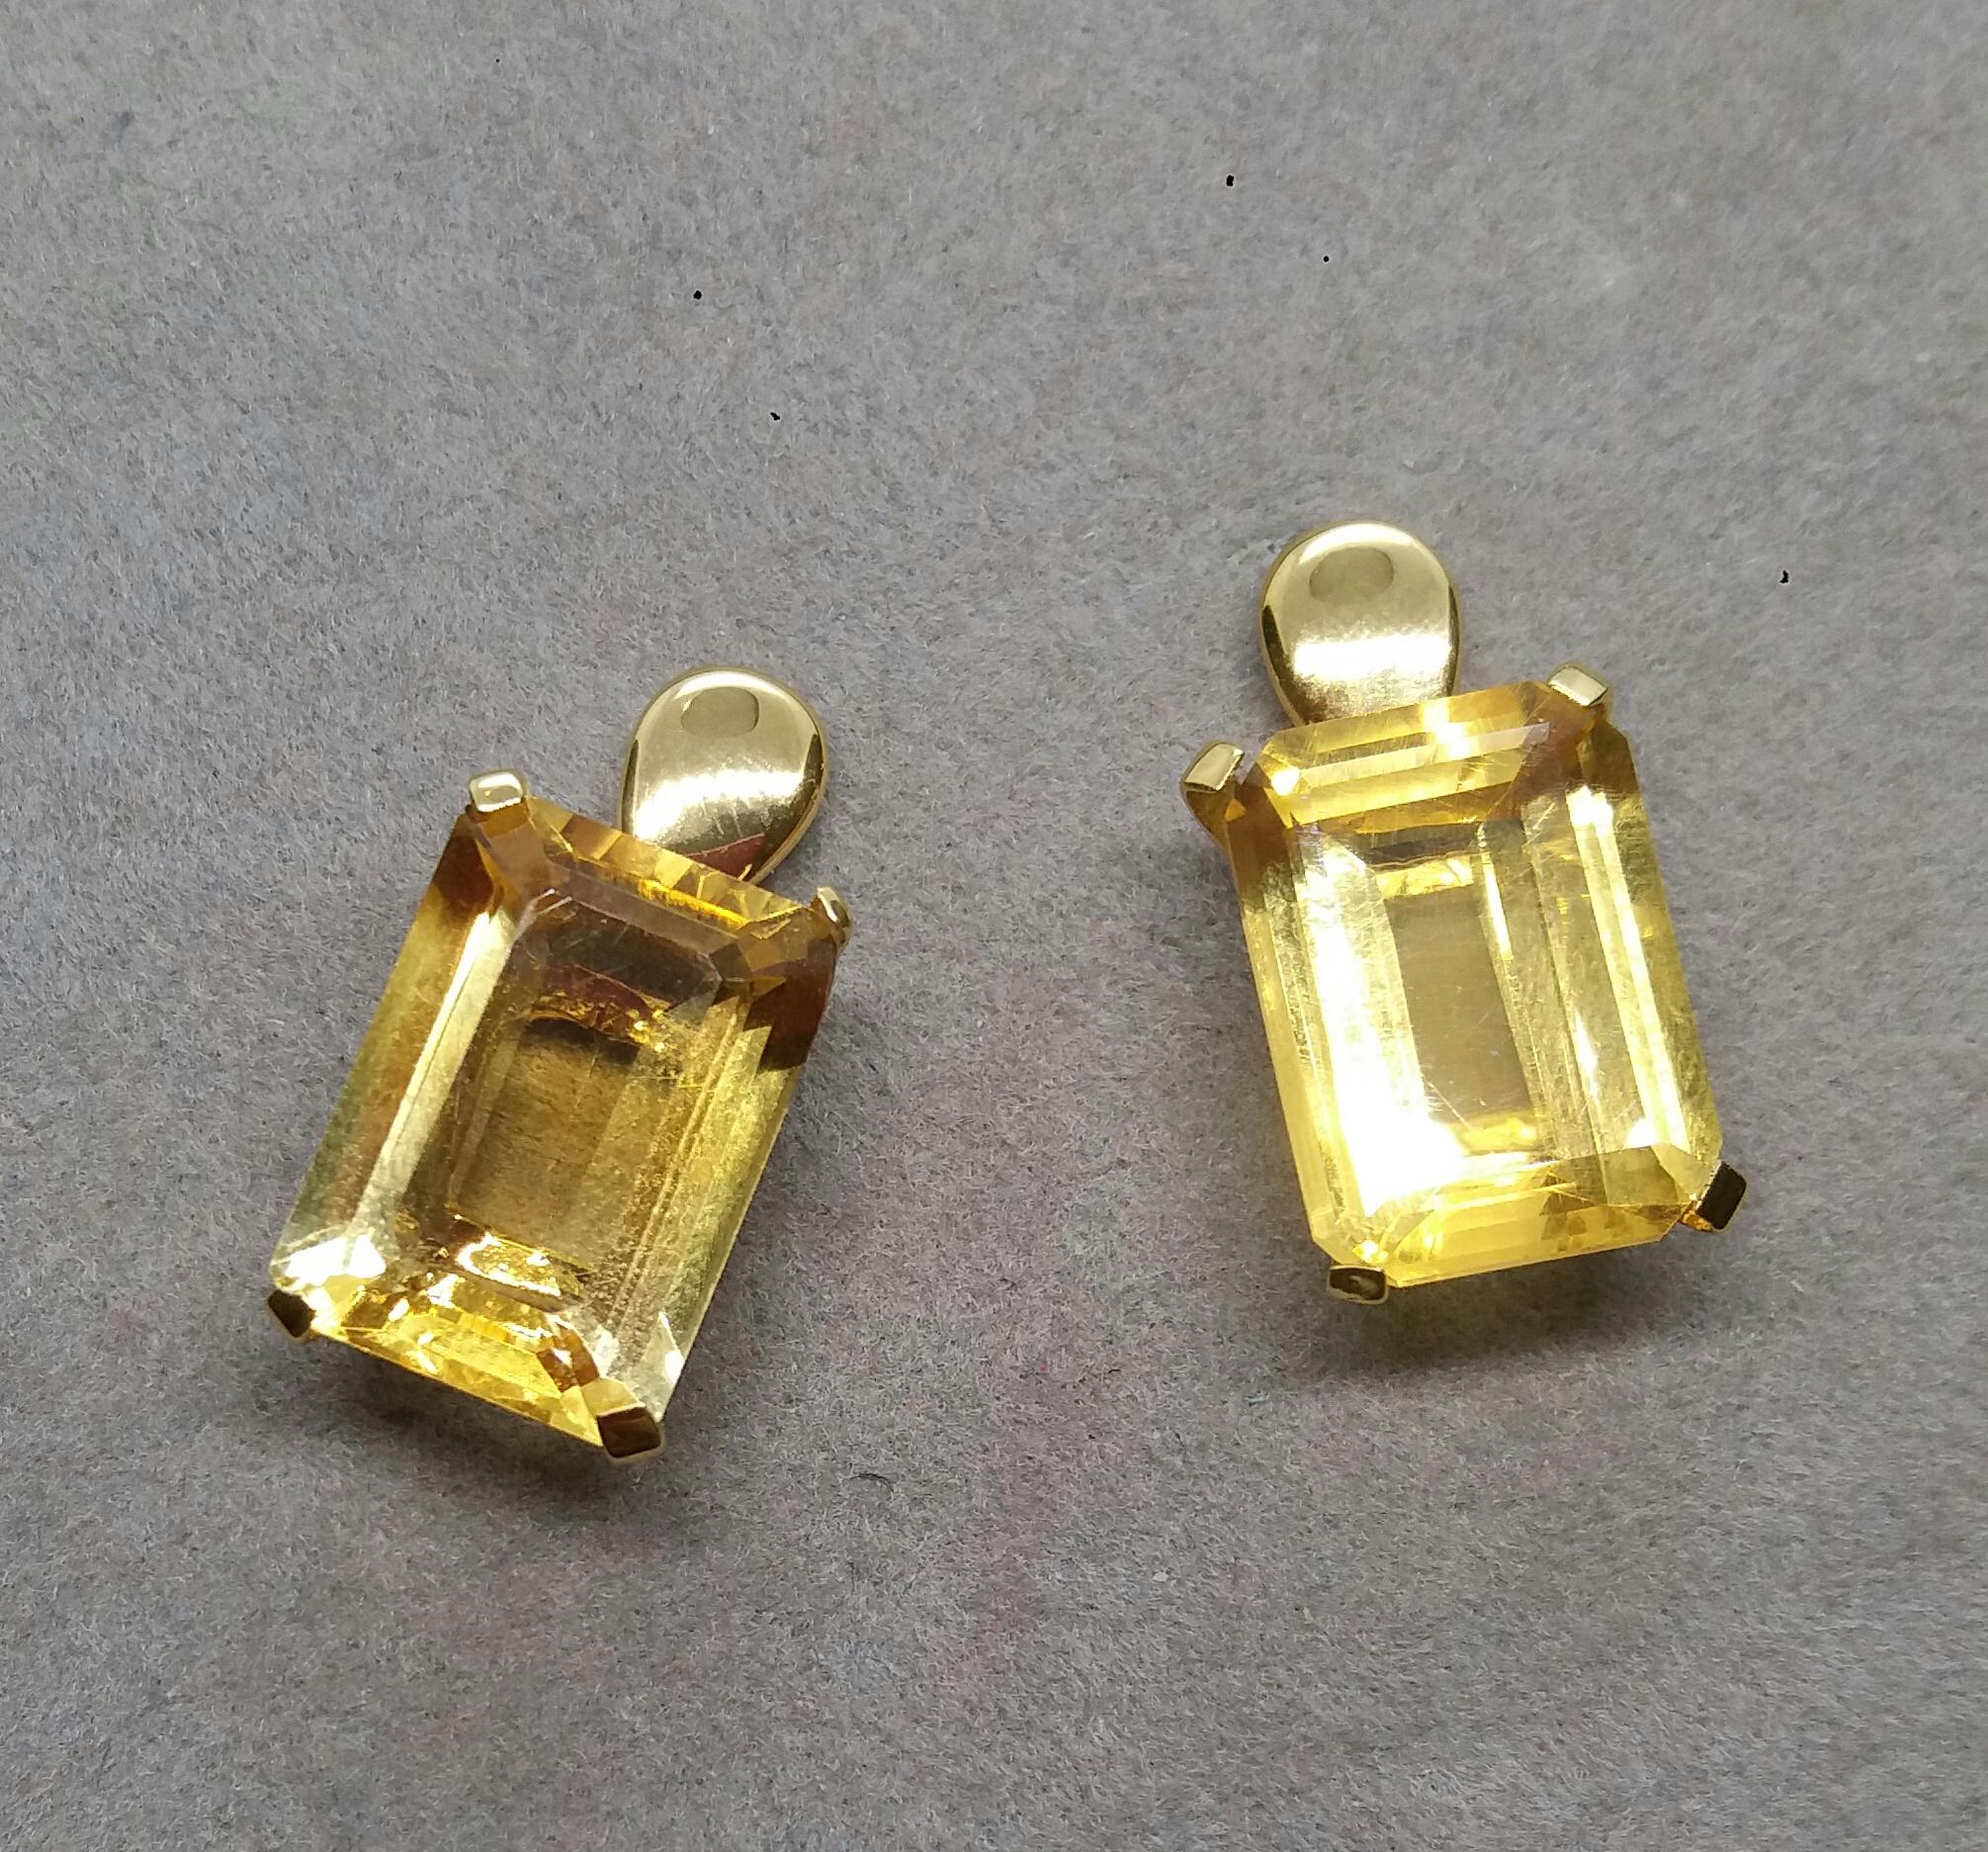 Octagon Cut Faceted Golden Citrine Octagon Shape 14 Karat Yellow Gold Stud Earrings For Sale